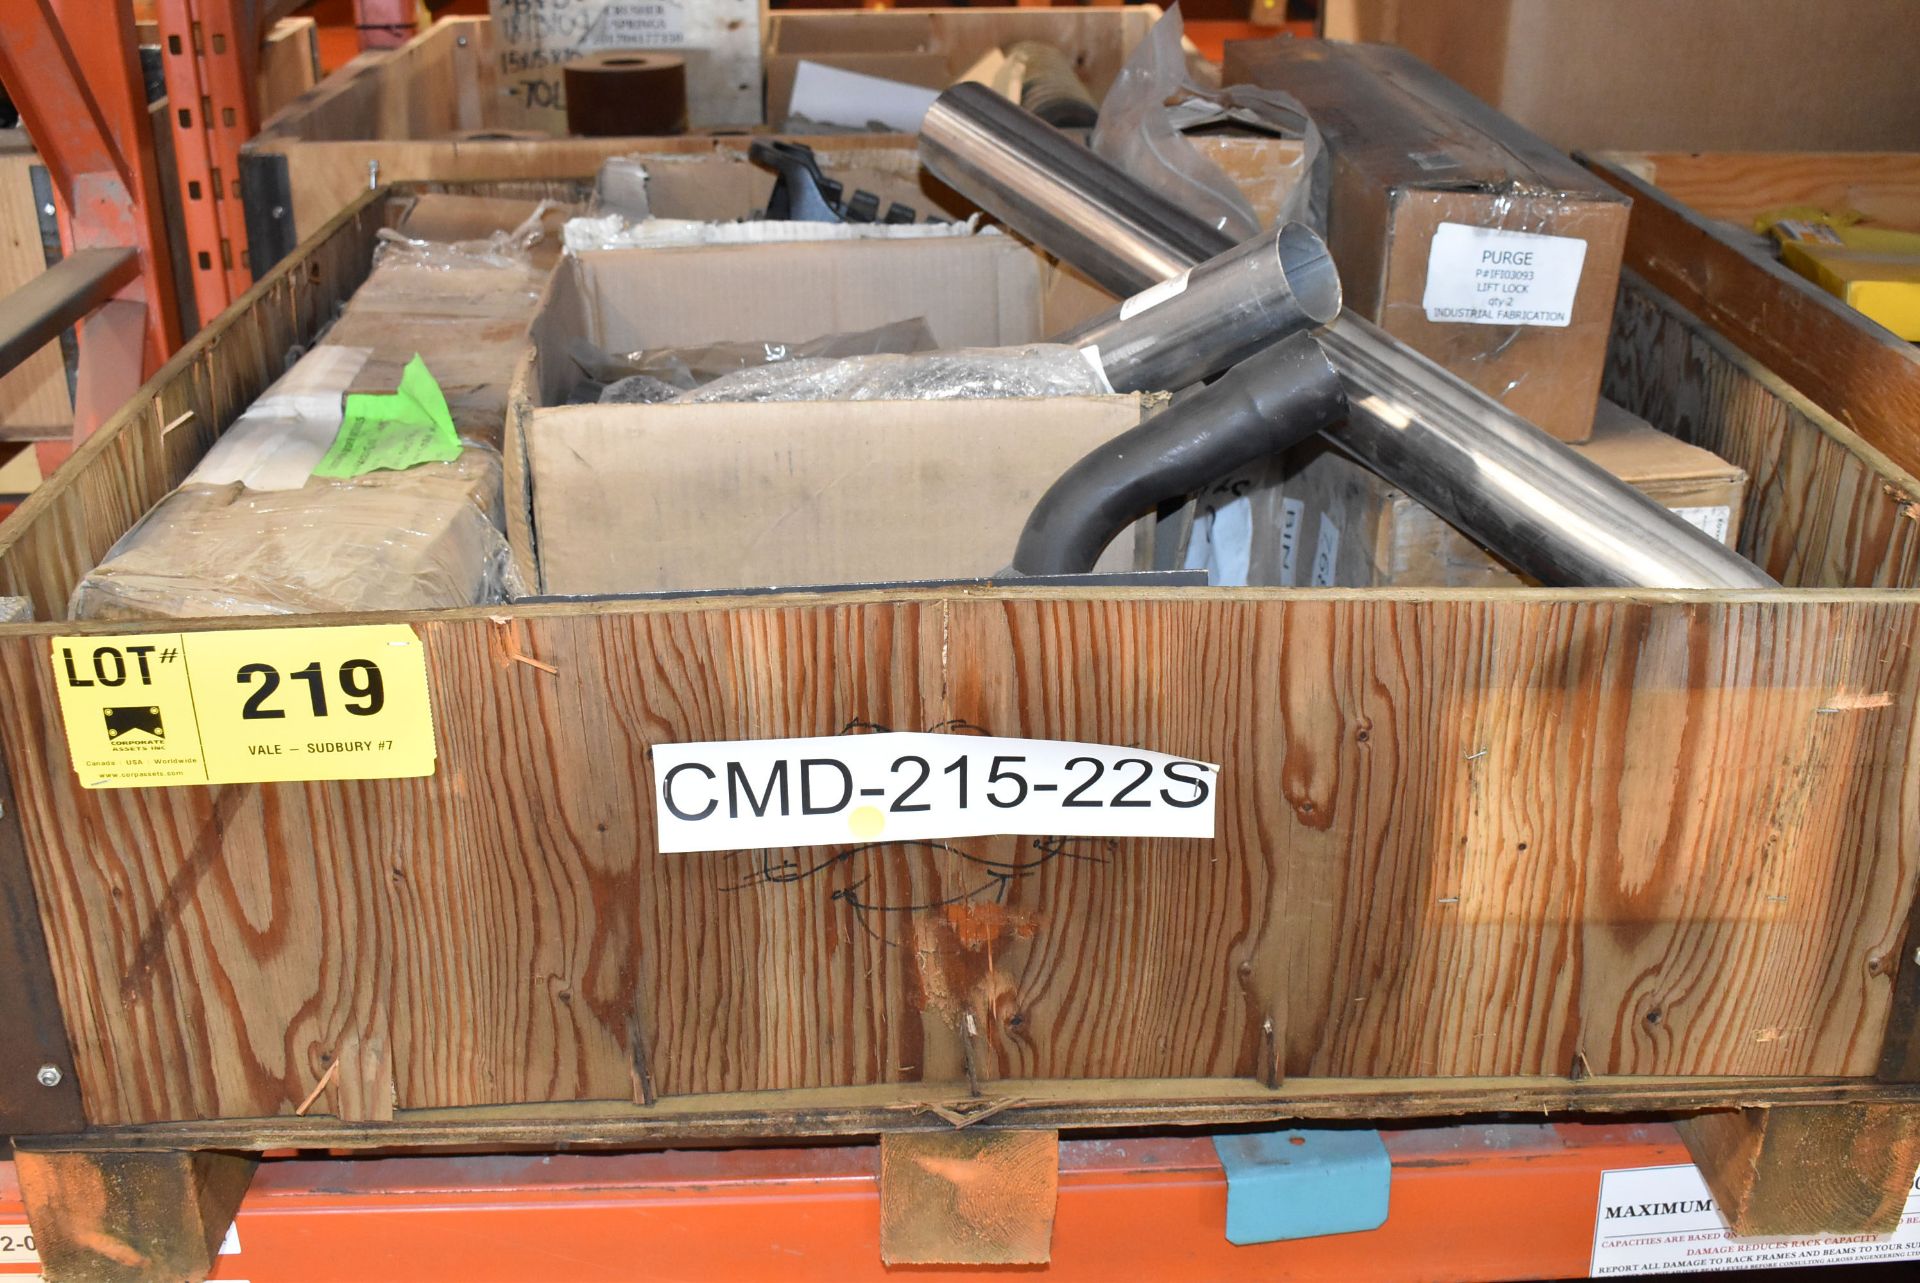 LOT/ SKID WITH MARCOTTE & MINE CAT PARTS - INCLUDING LIFT LOCKS, CONTROLS, TUBES, HARDWARE, HOUSINGS